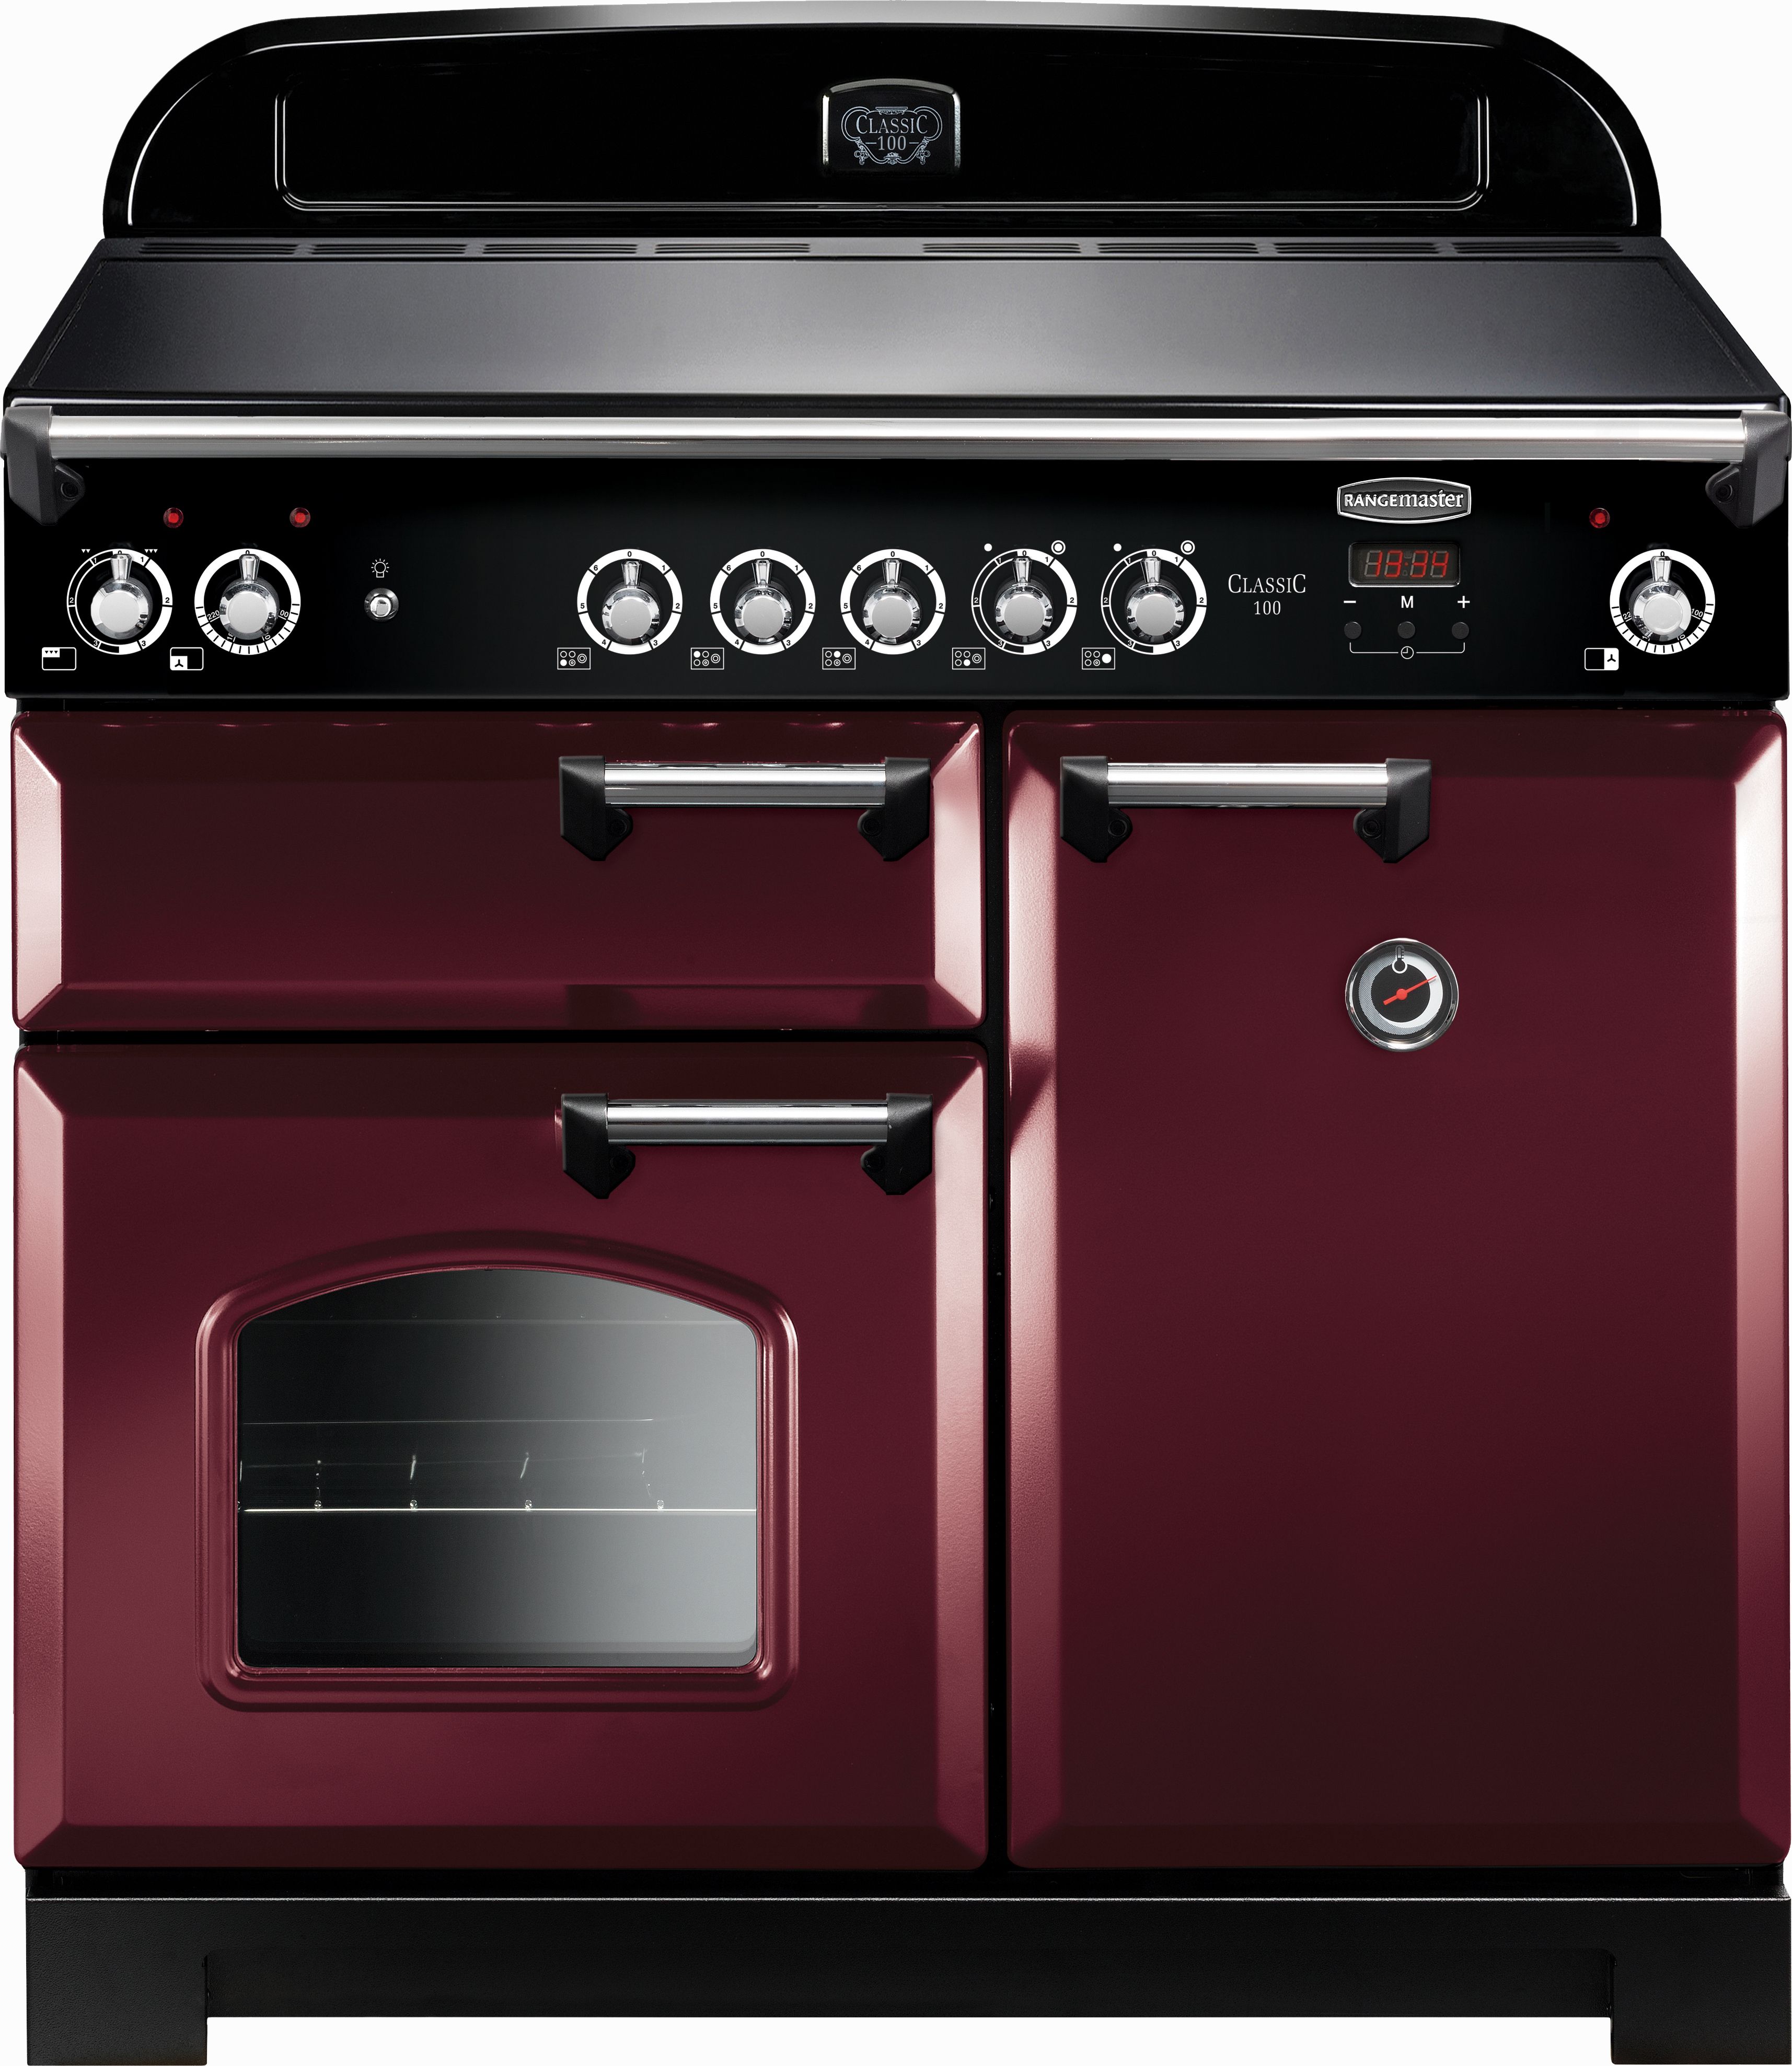 Rangemaster Classic CLA100ECCY/C 100cm Electric Range Cooker with Ceramic Hob - Cranberry / Chrome - A/A Rated, Red